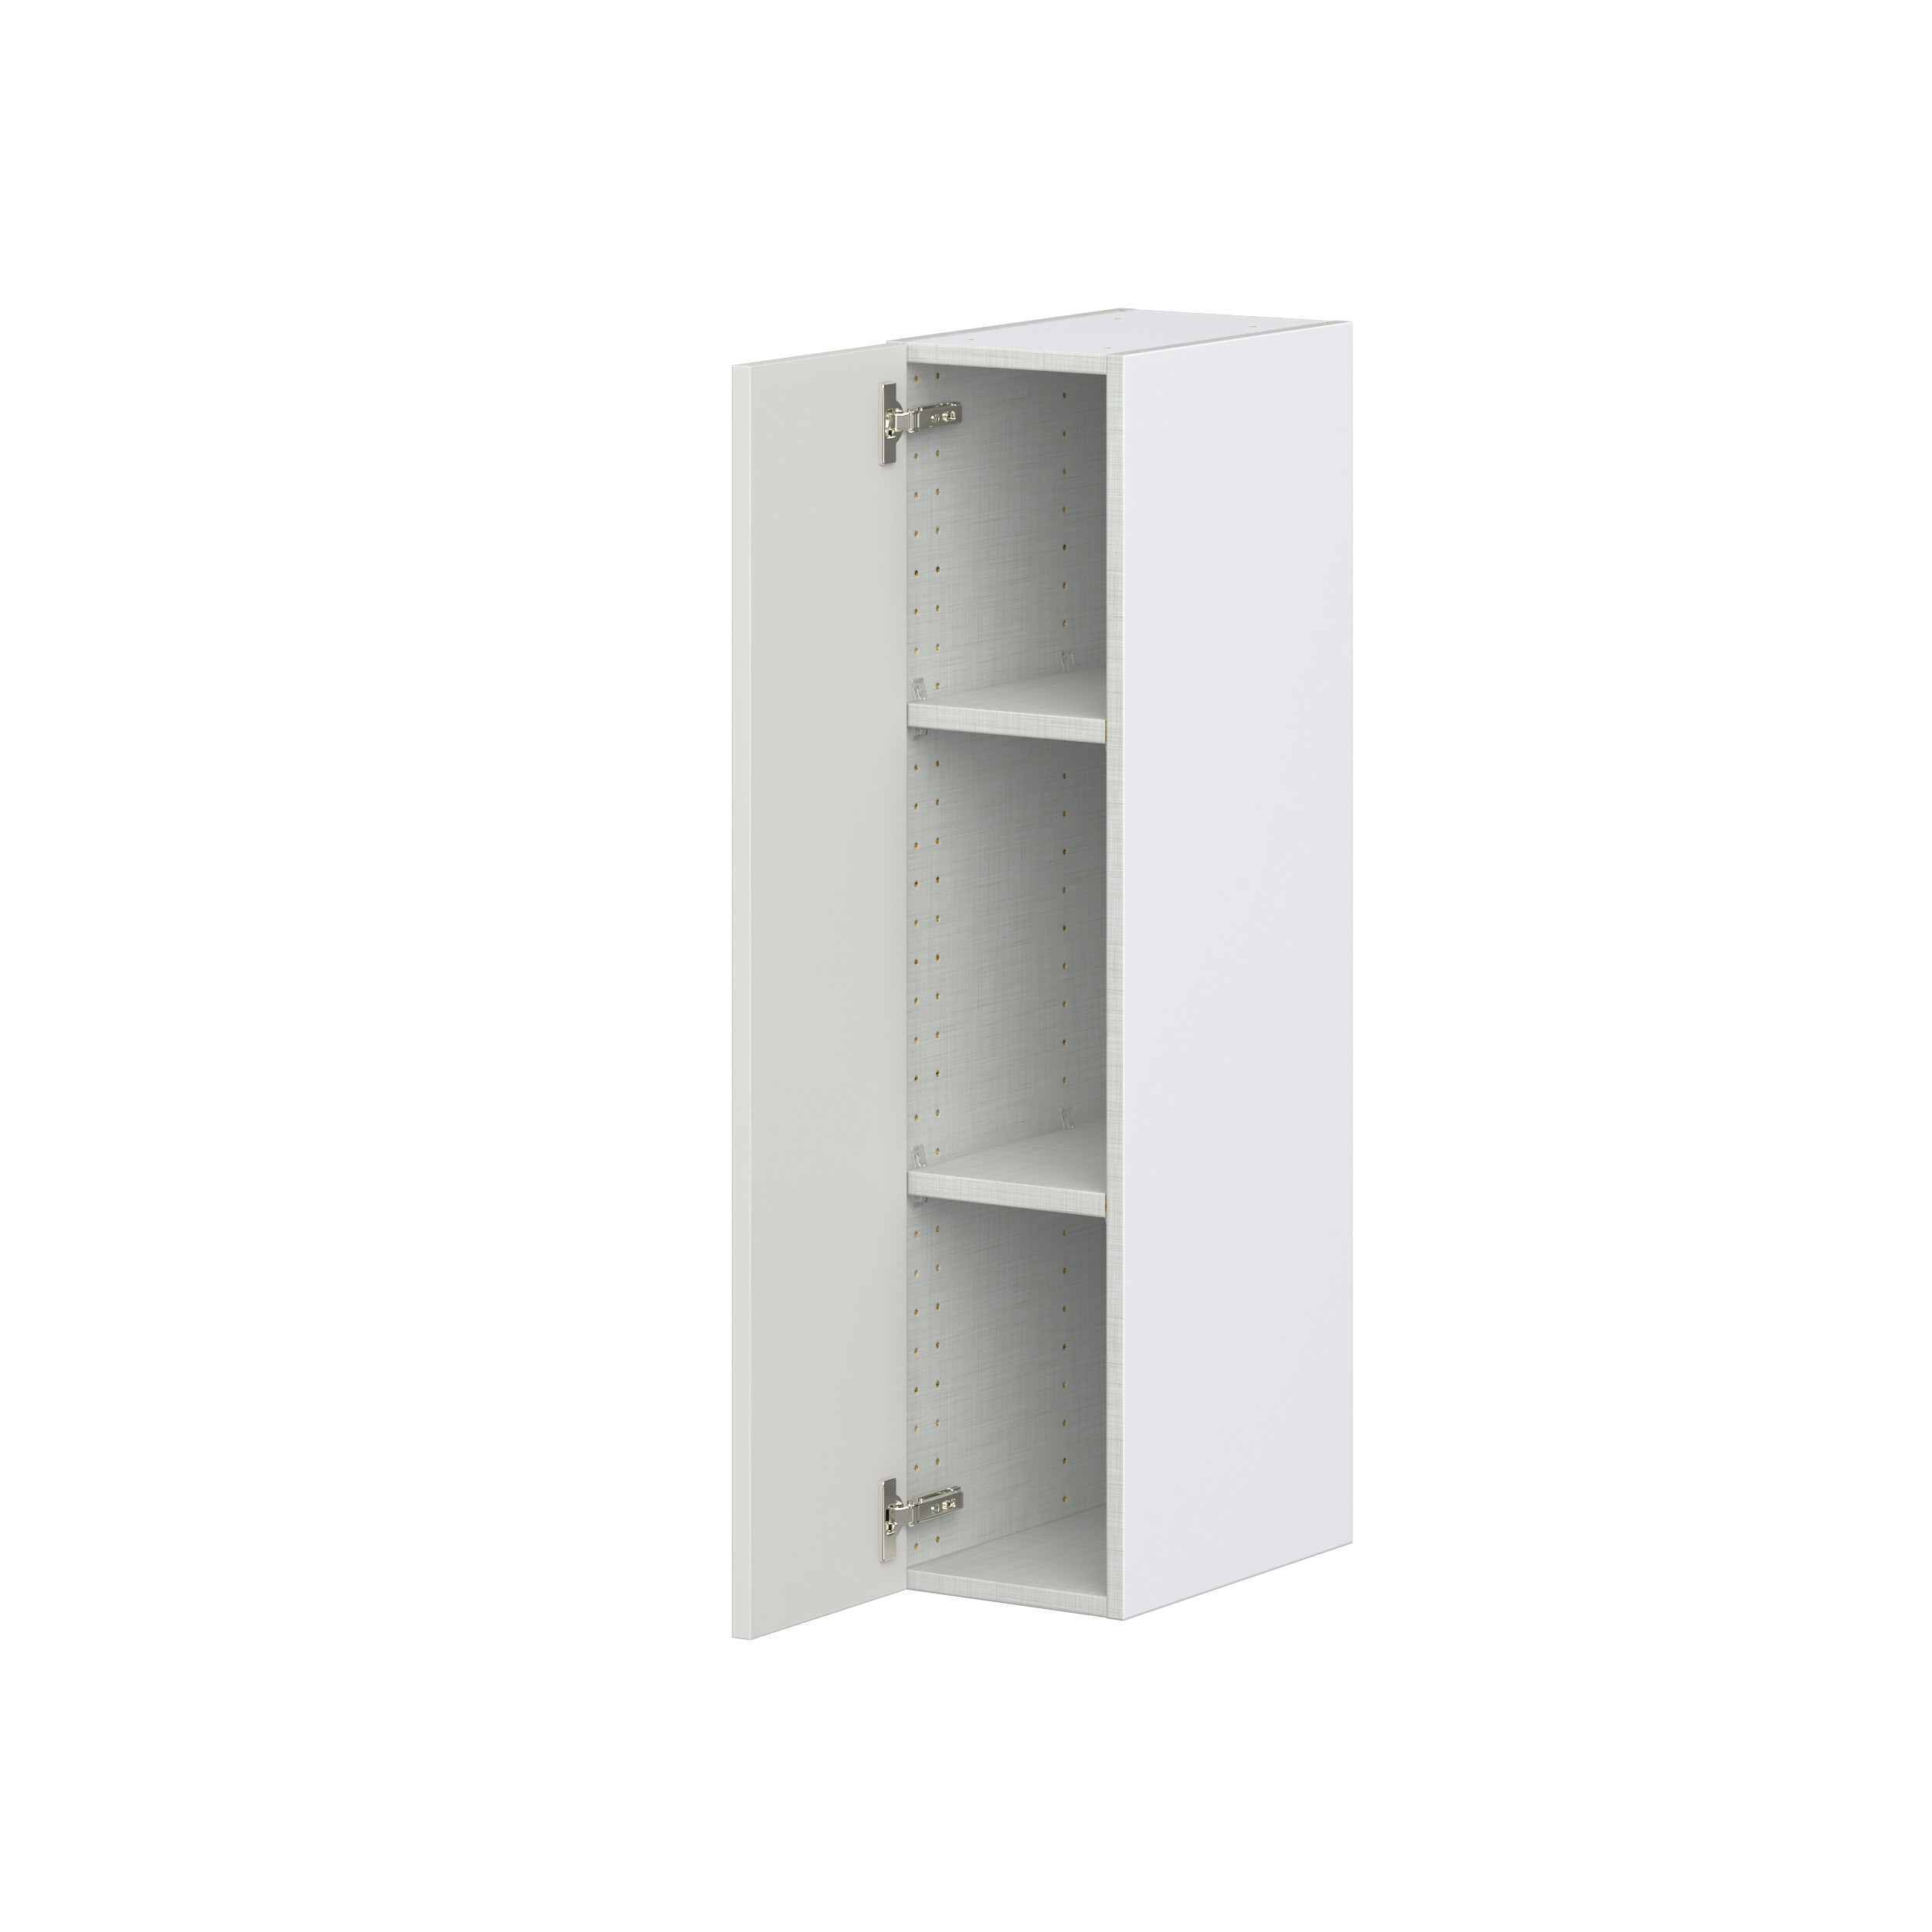 Wisteria Painted Light Gray Recessed Assembled Wall Cabinet with Full High Door (9 in. W x 40 in. H x 14 in. D)